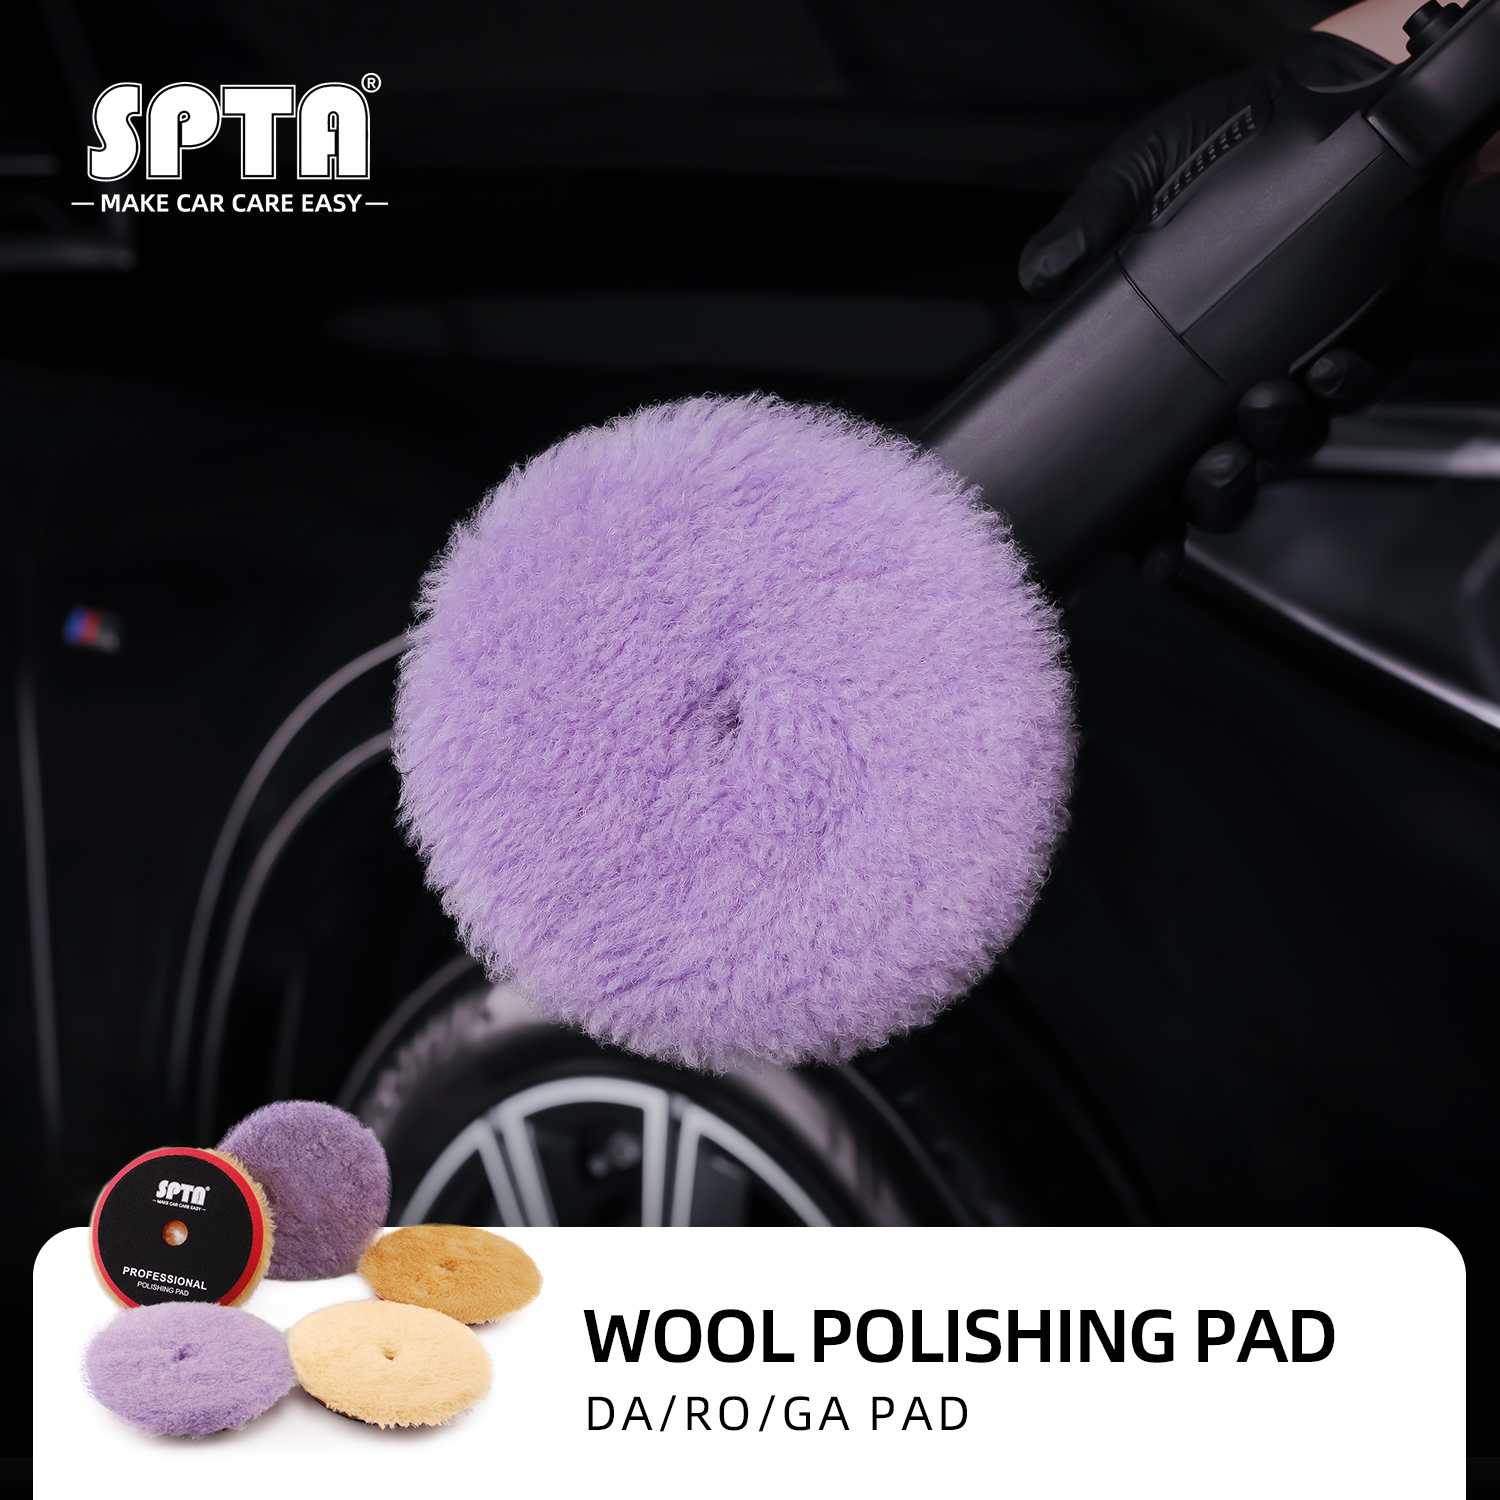 SPTA 8 (200mm) Wool Buffing Pad, Double Side 100% Natural Wool Pad with  5/8-11 Thread for 2-Sided Compound Cutting and Polishing for Automotive